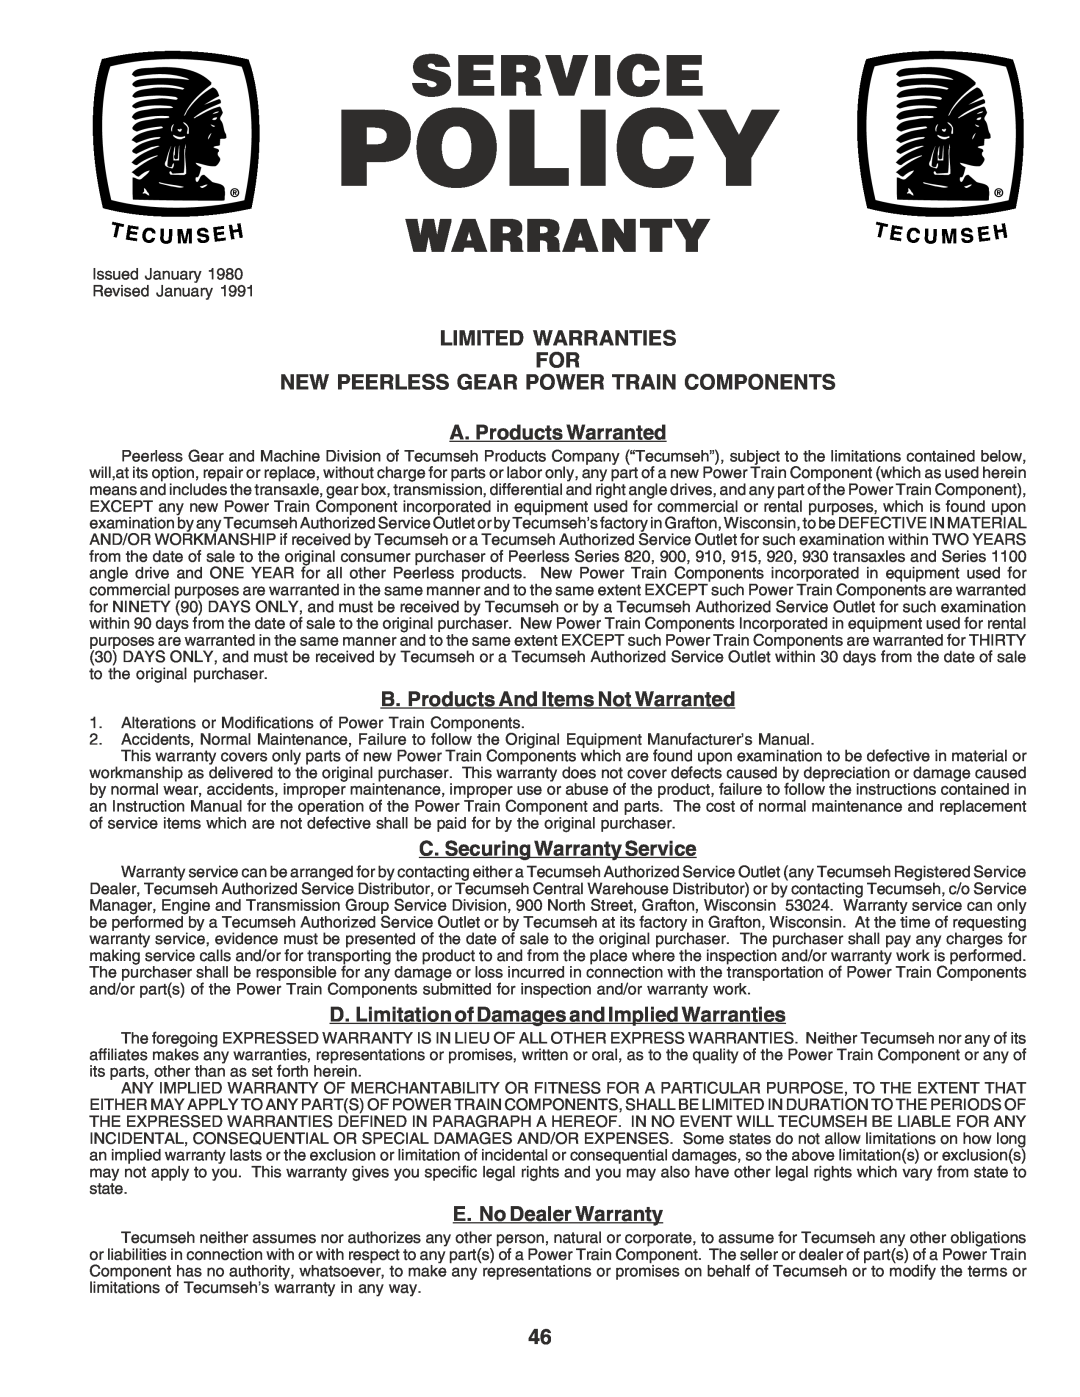 Poulan PR17542STA owner manual Limited Warranties For, New Peerless Gear Power Train Components, Policy 